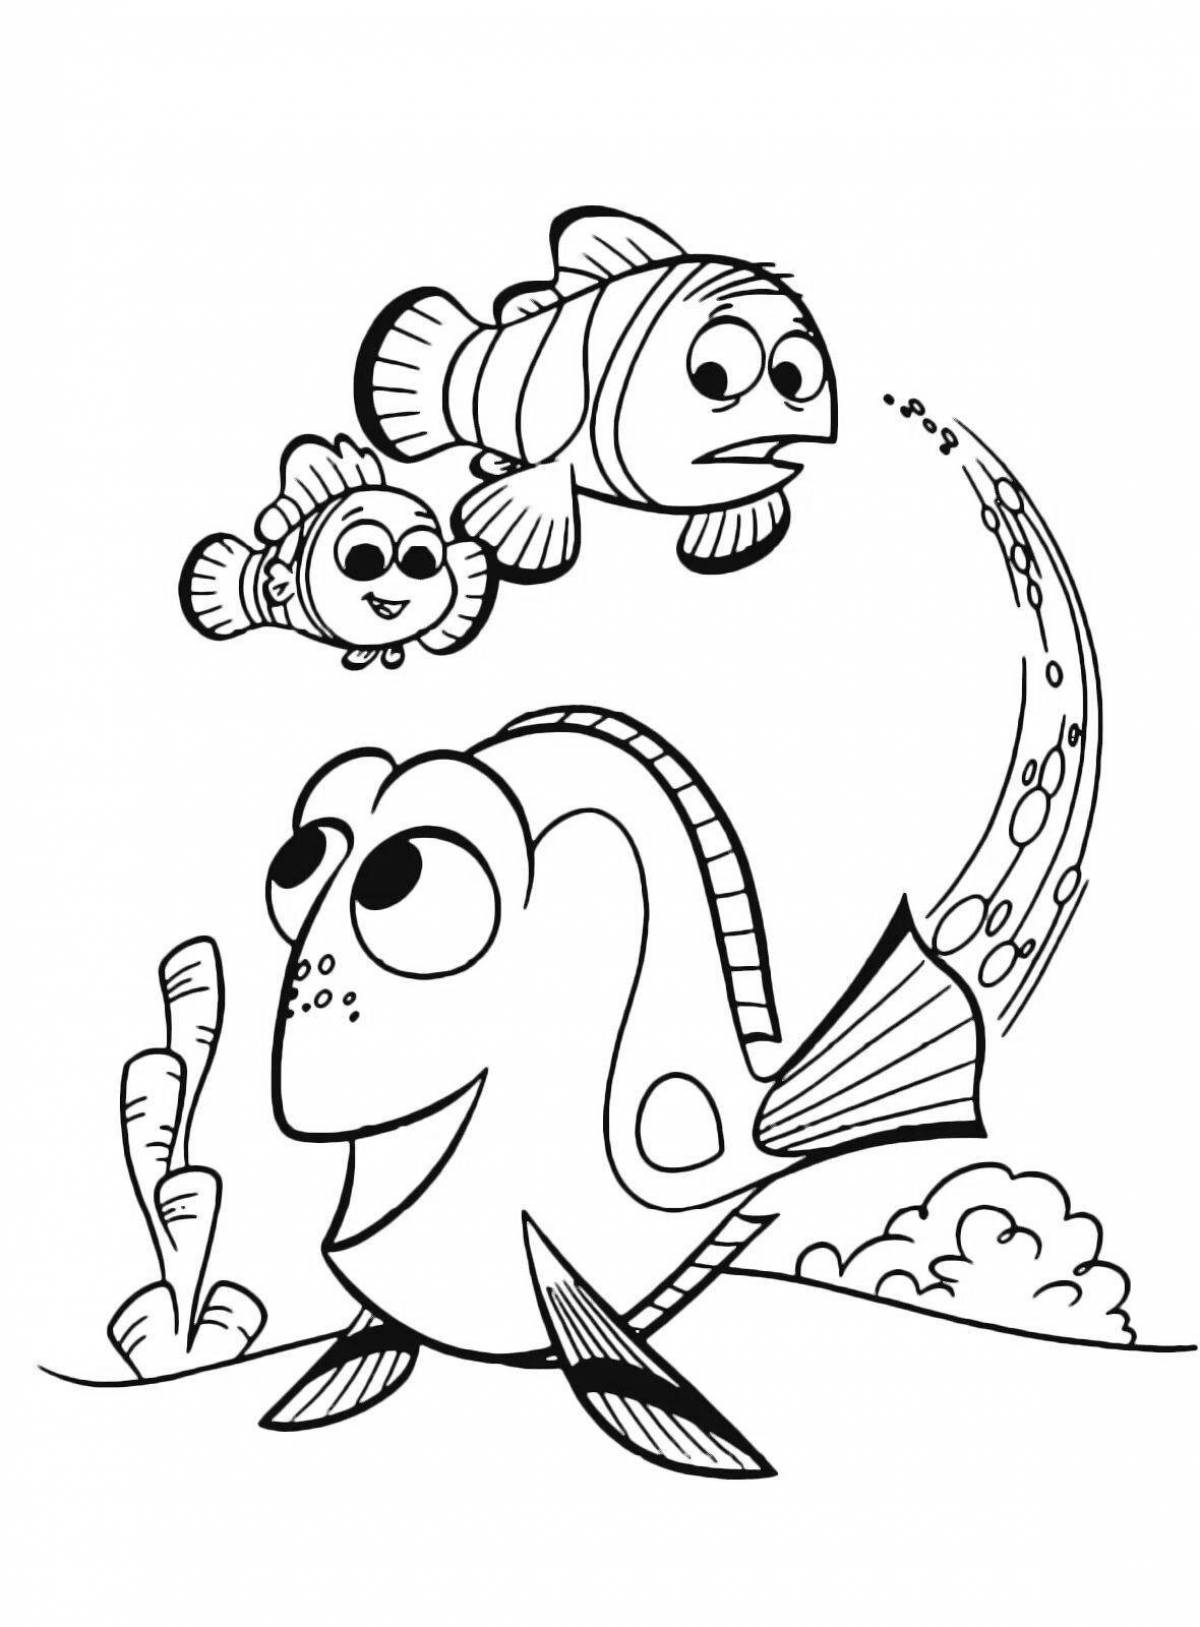 Colorful dory fish coloring page